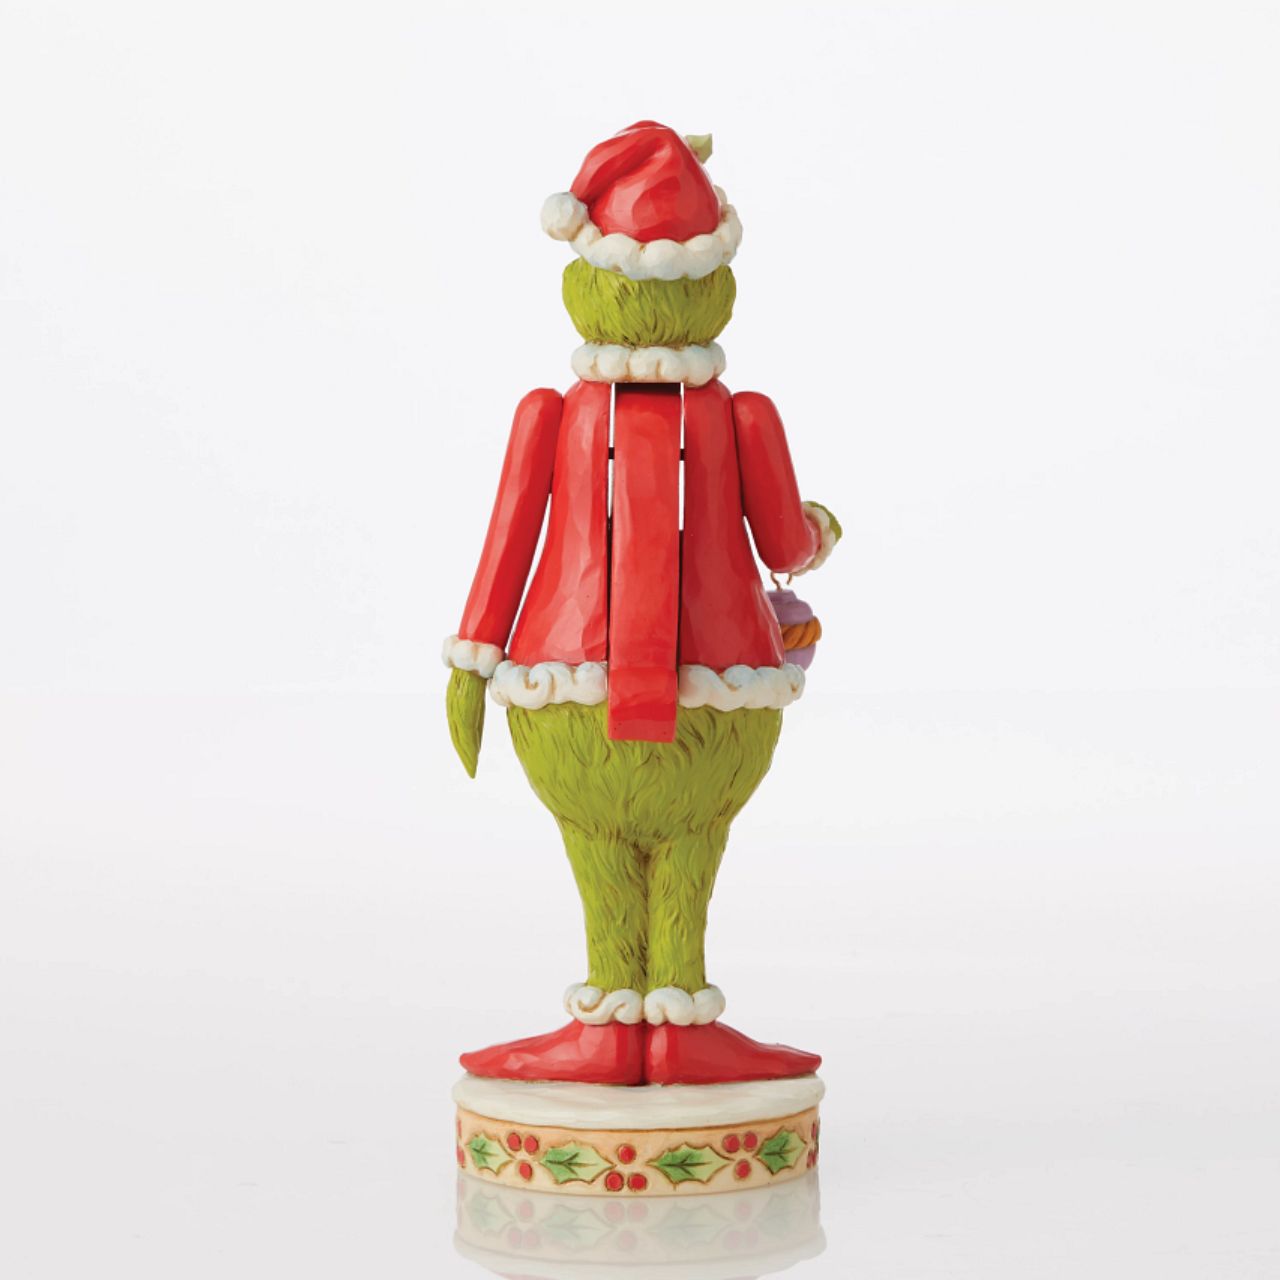 Grinch Nutcracker Figurine - The Grinch by Jim Shore  Marrying two beloved holiday figures, Jim Shore creates a Grinch Nutcracker that captures the grump in all his glory. With holly brimmed in his Santa hat, no one dares kiss this Christmas curmudgeon for fear of being cracked across the face.